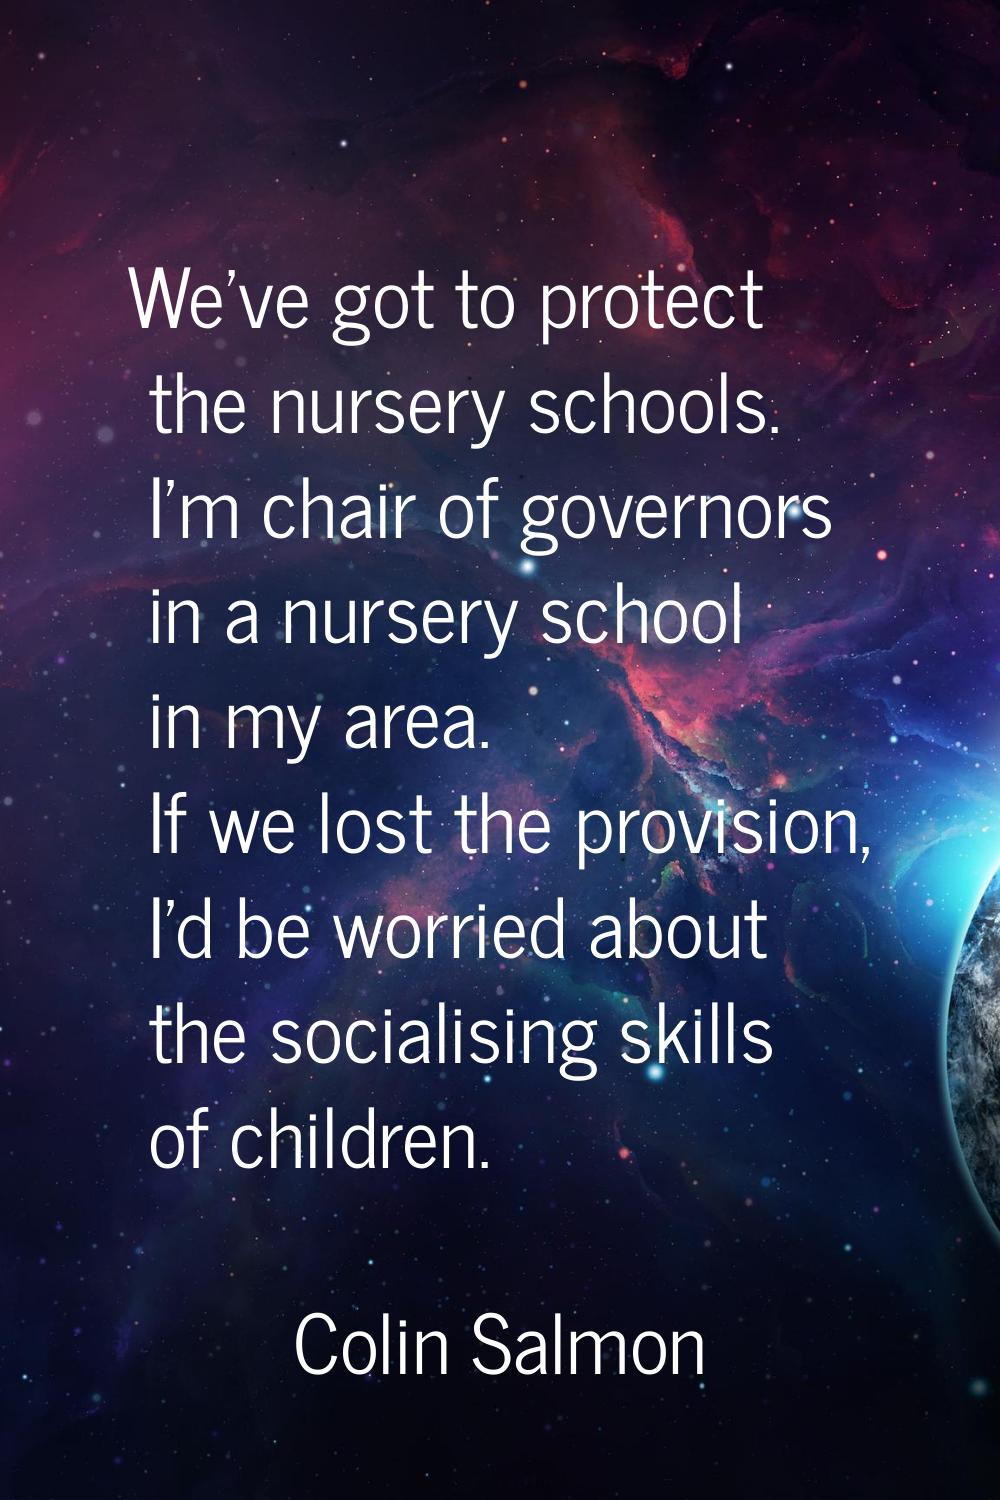 We've got to protect the nursery schools. I'm chair of governors in a nursery school in my area. If